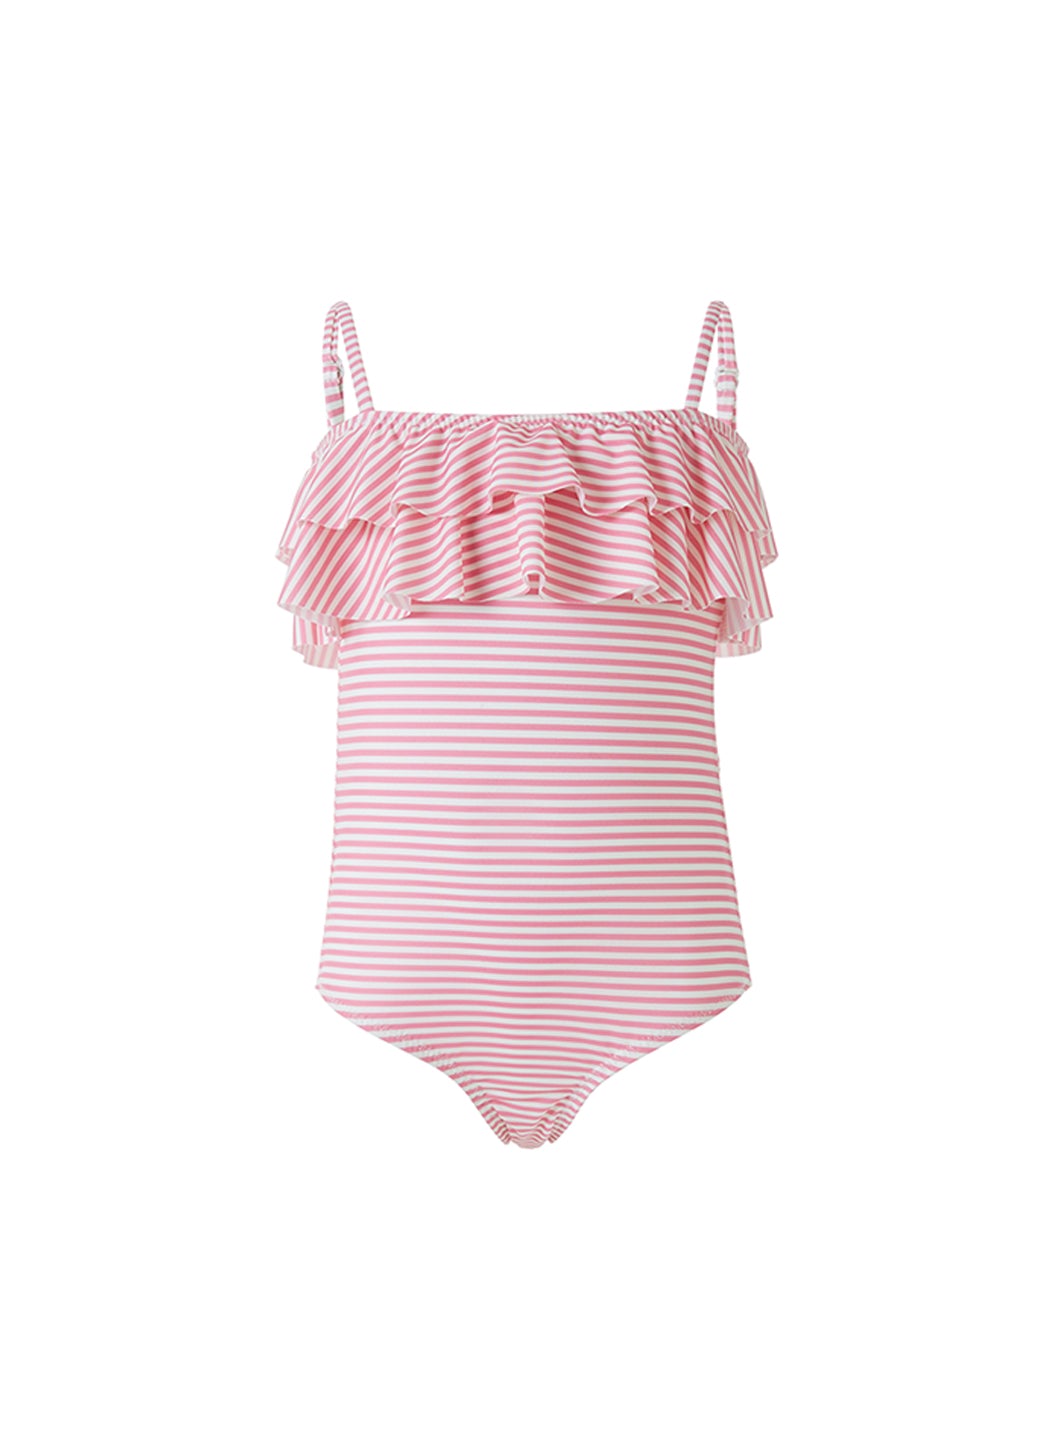 Baby Ivy Pink Stripe Swimsuit